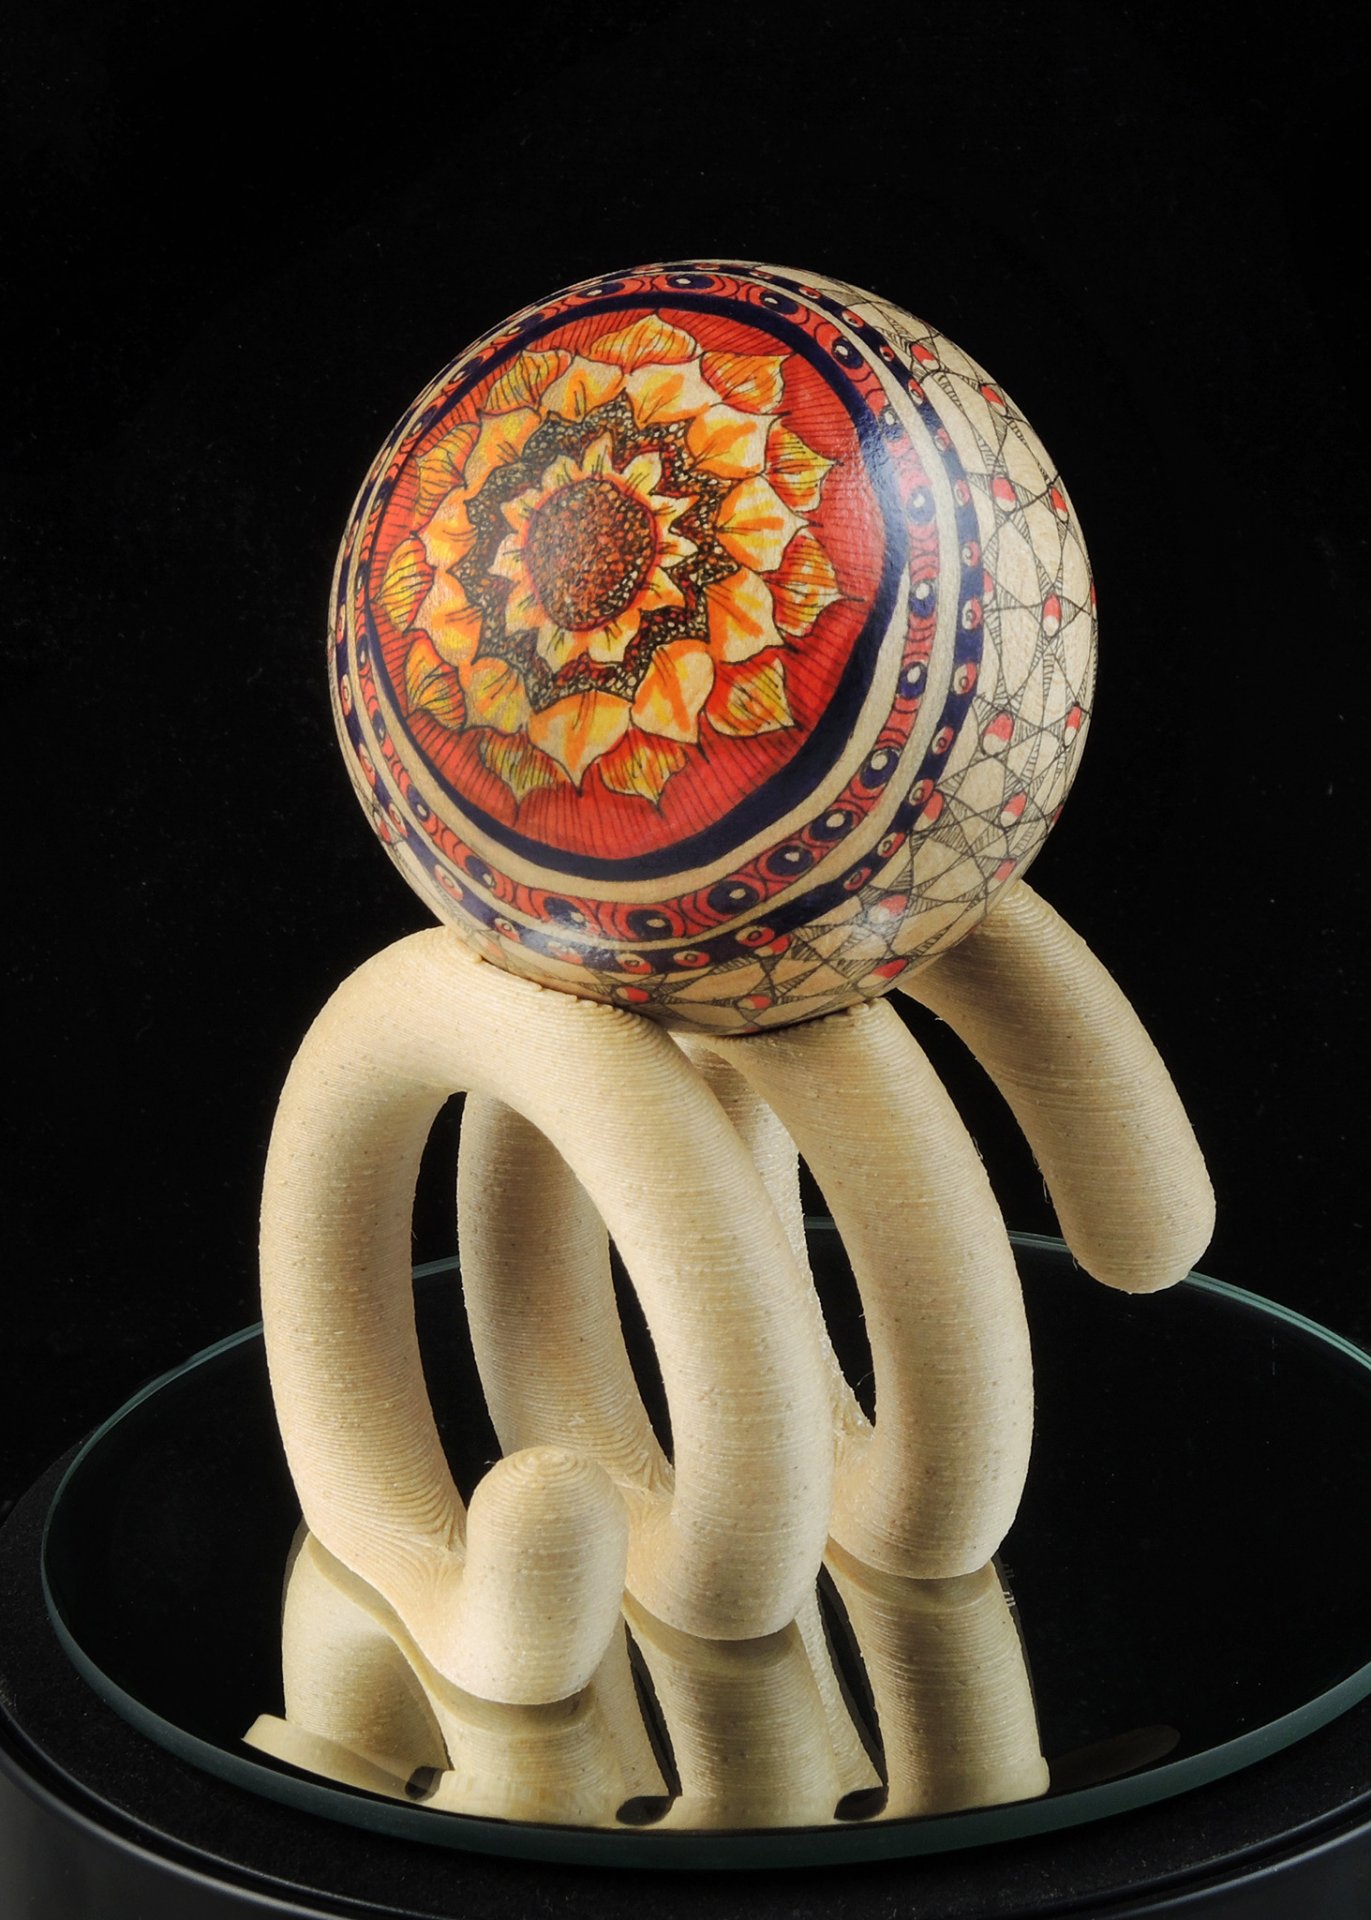 Sphere with Coil